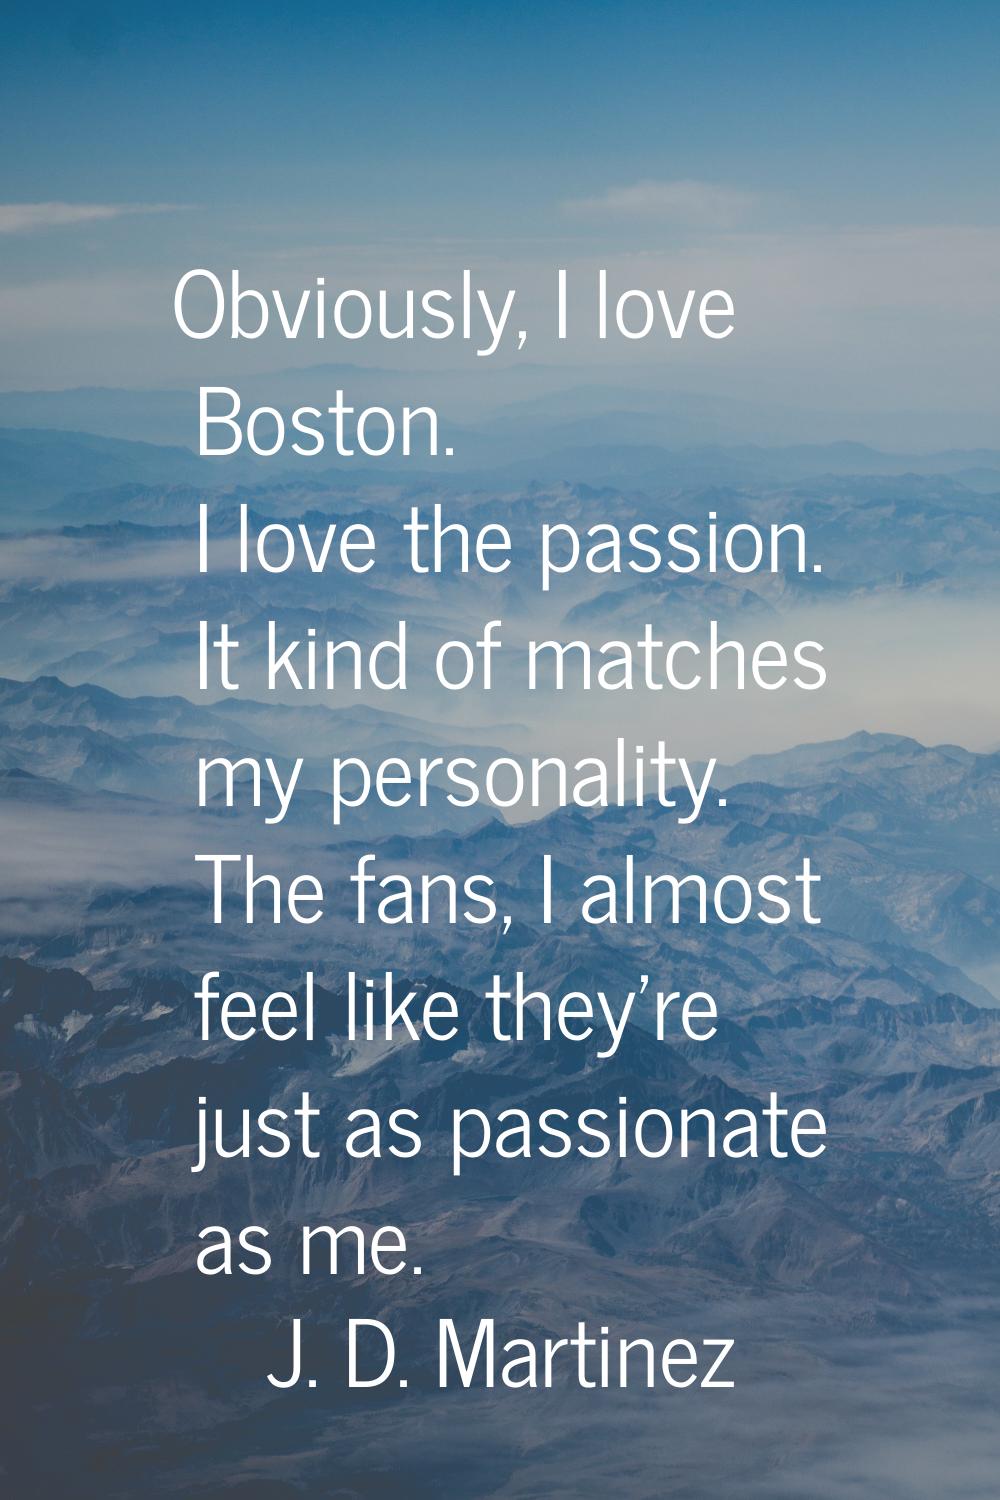 Obviously, I love Boston. I love the passion. It kind of matches my personality. The fans, I almost